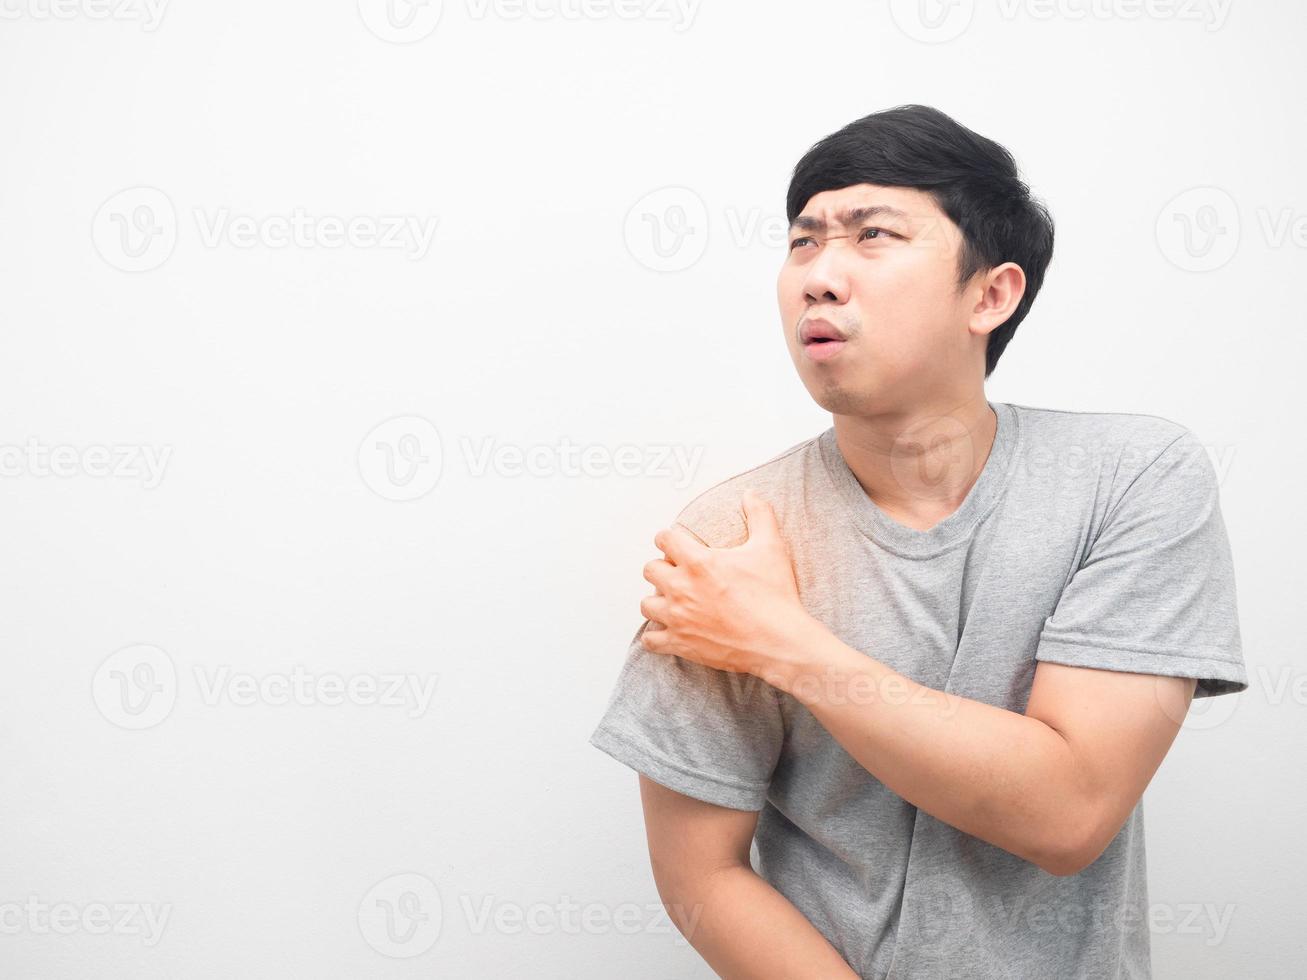 Asian man gesture hurt his shoulder looking at copy space photo